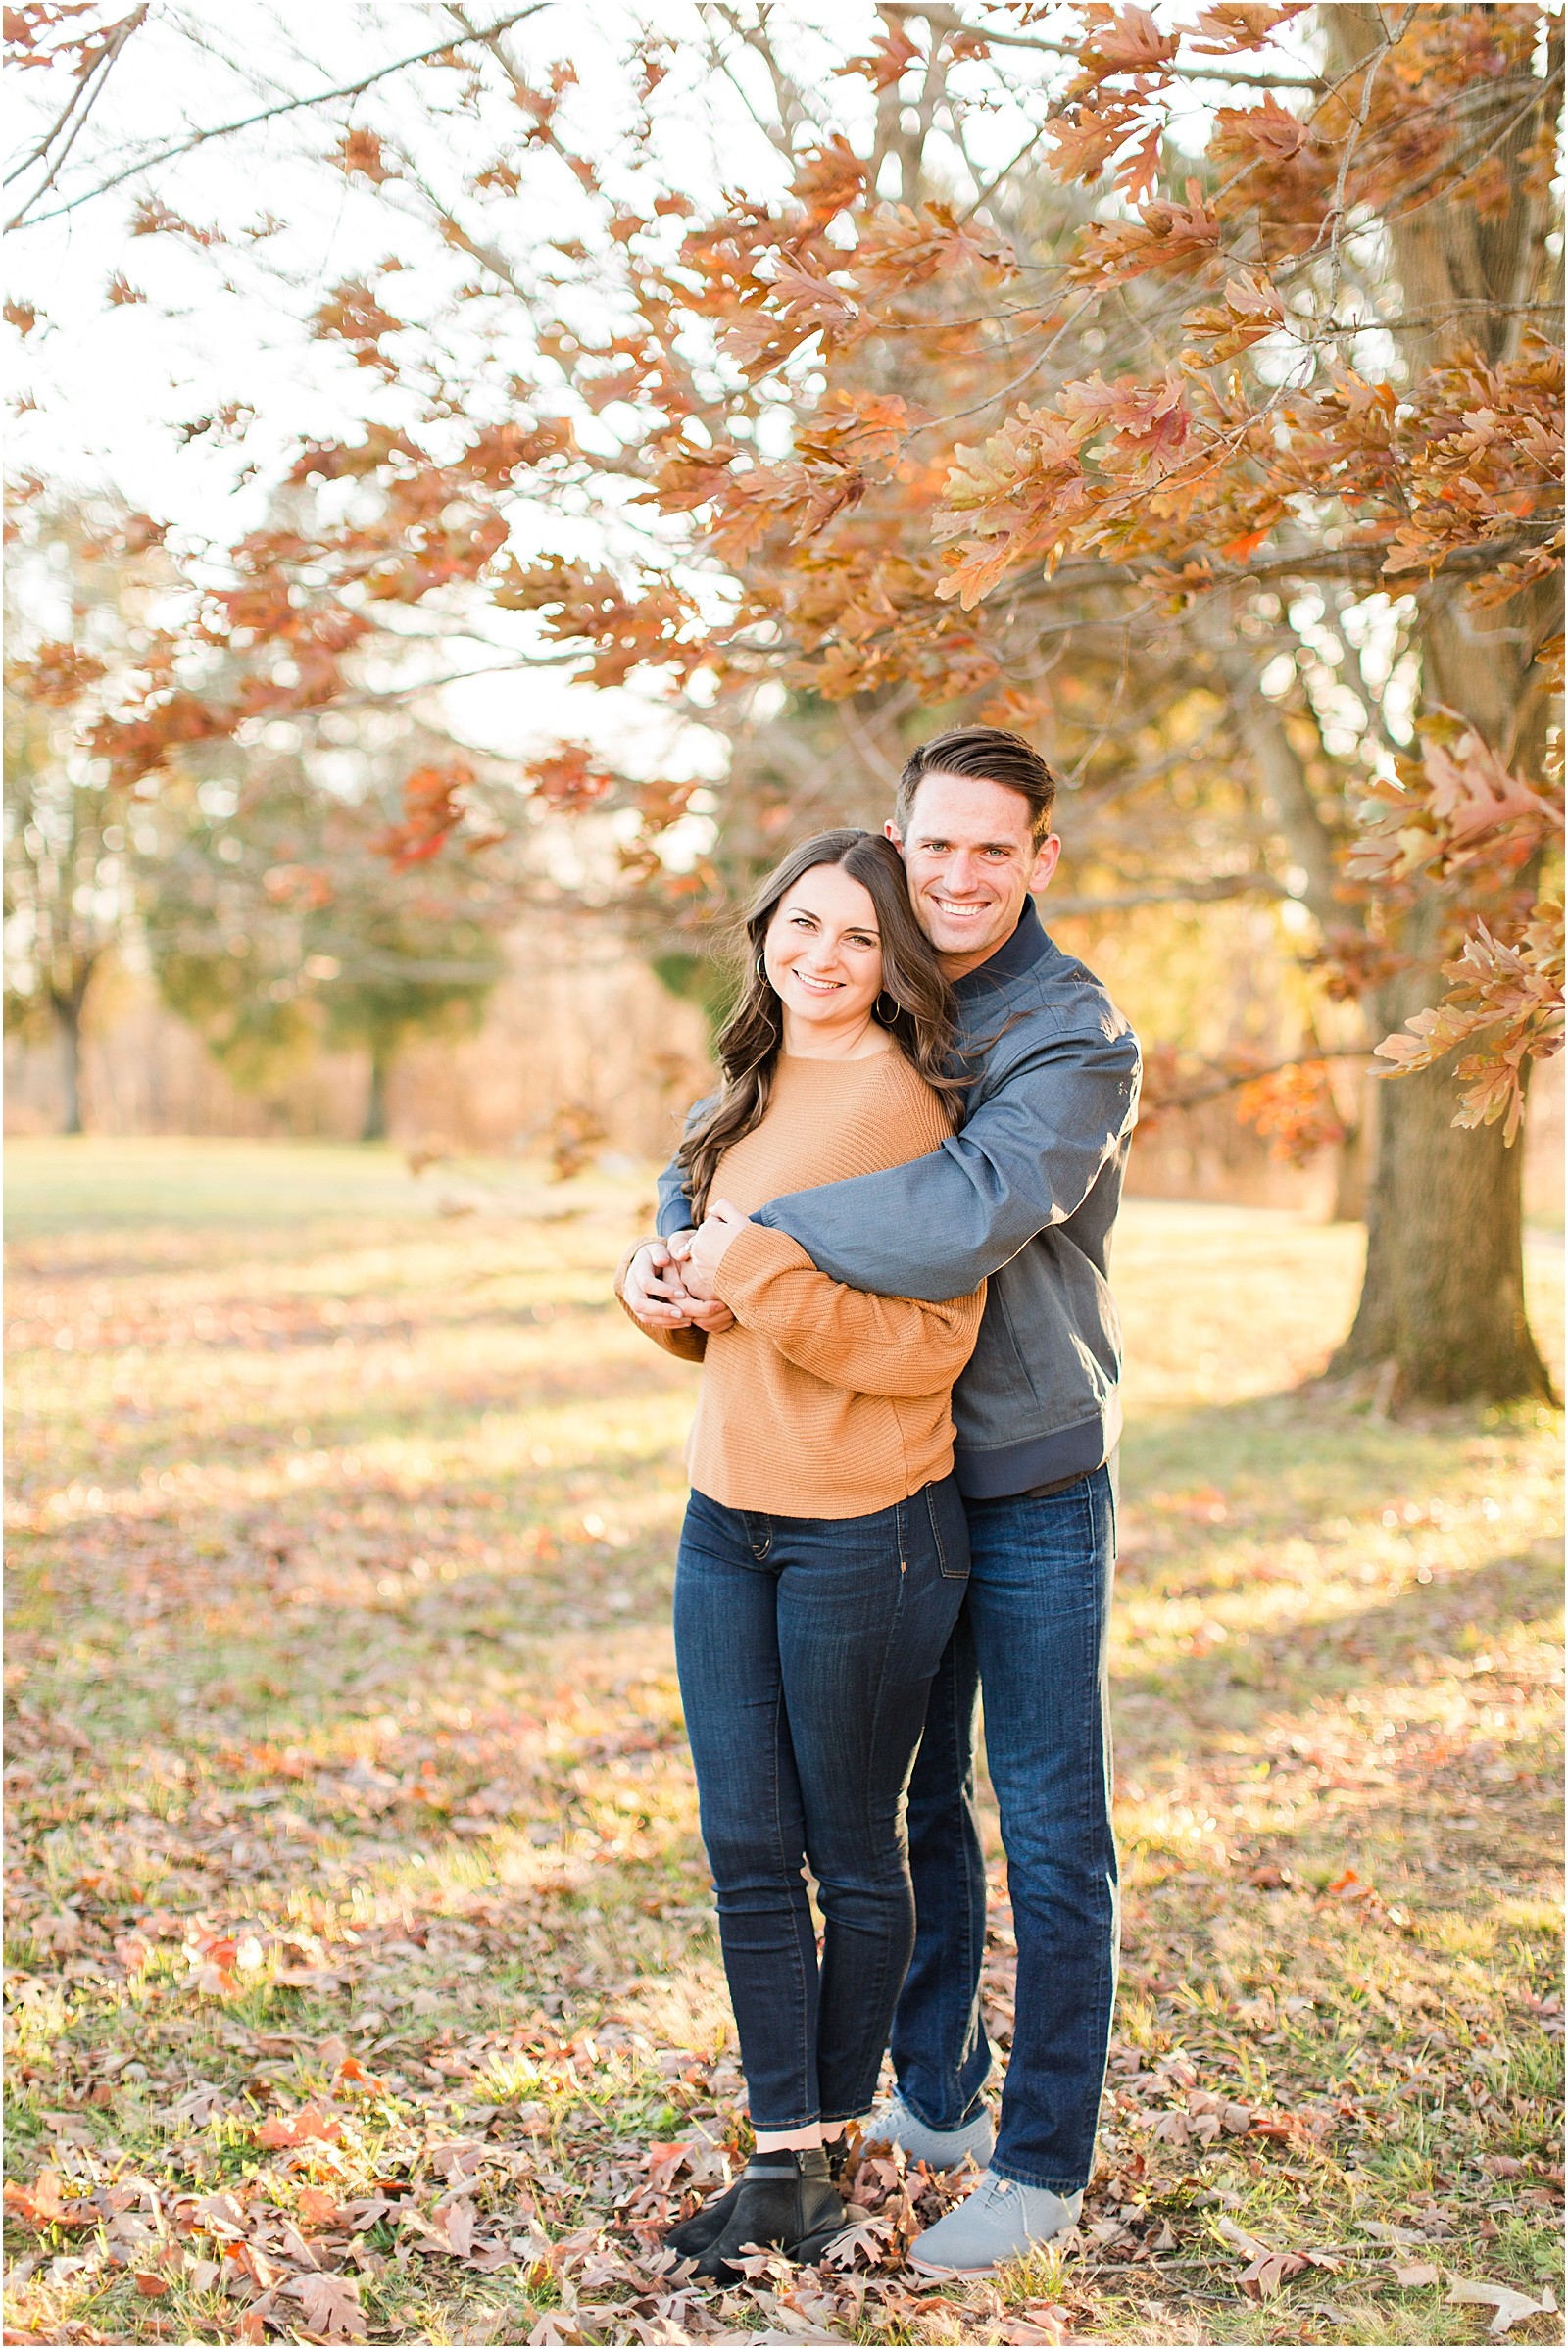 Kaley and Devon's fall Evansville Indiana engagement session. | #fallengagementsession #evansvilleindiana #evansvilleindianawedding | 0027.jpg